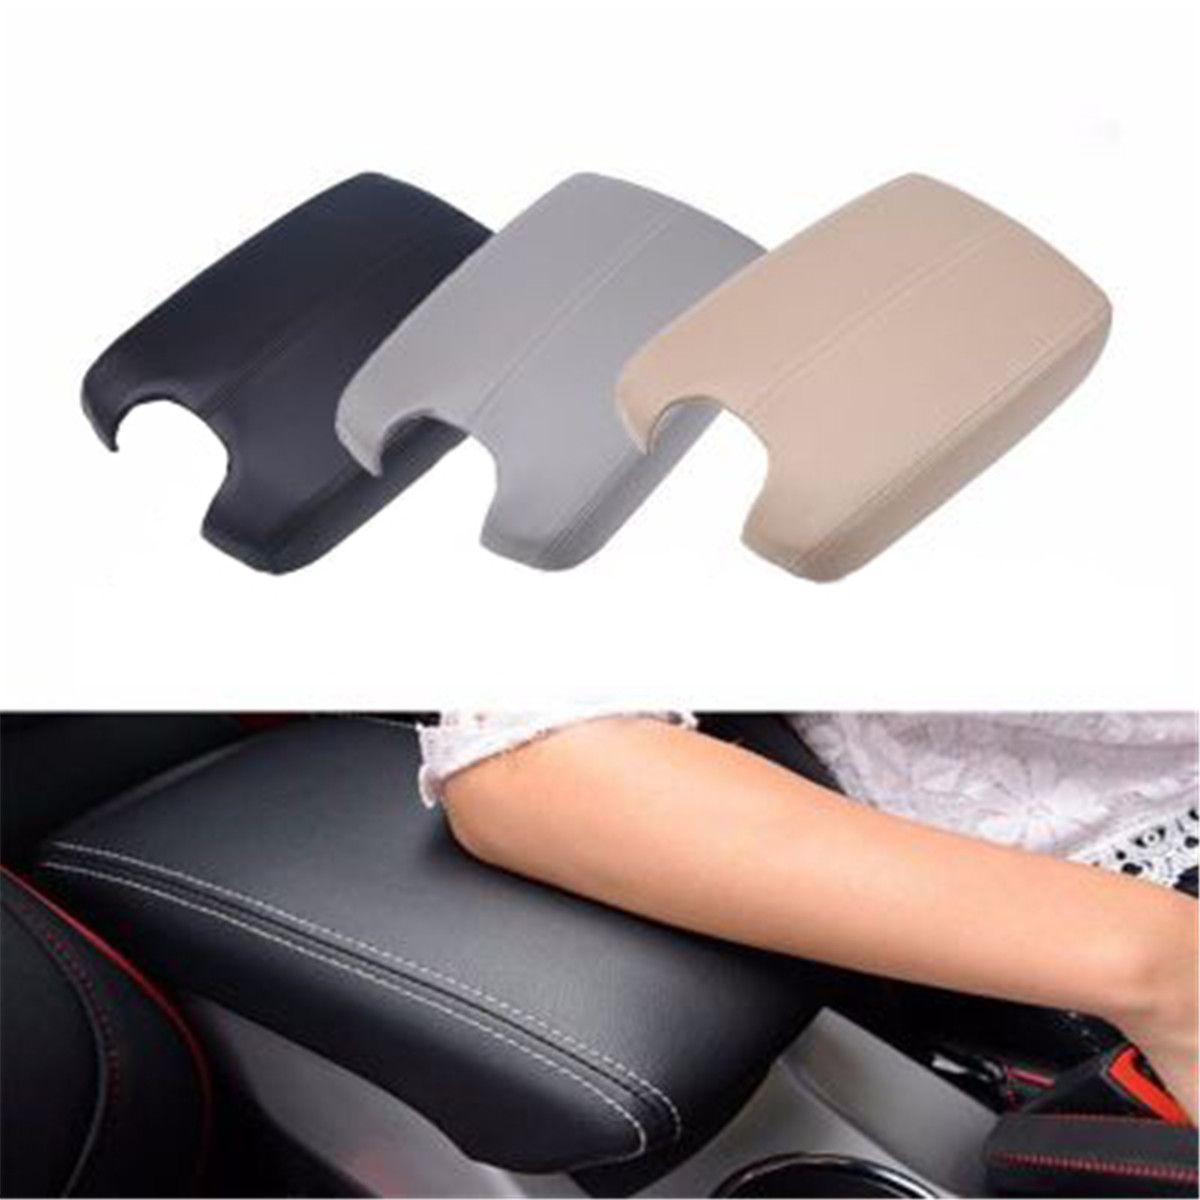 For 2008 2009 2010 2011 2012 Honda Accord Armrest Console Lid Cover Kit Black Beige Gray 1x Automotive Interior Supplies Automotive Interiors And